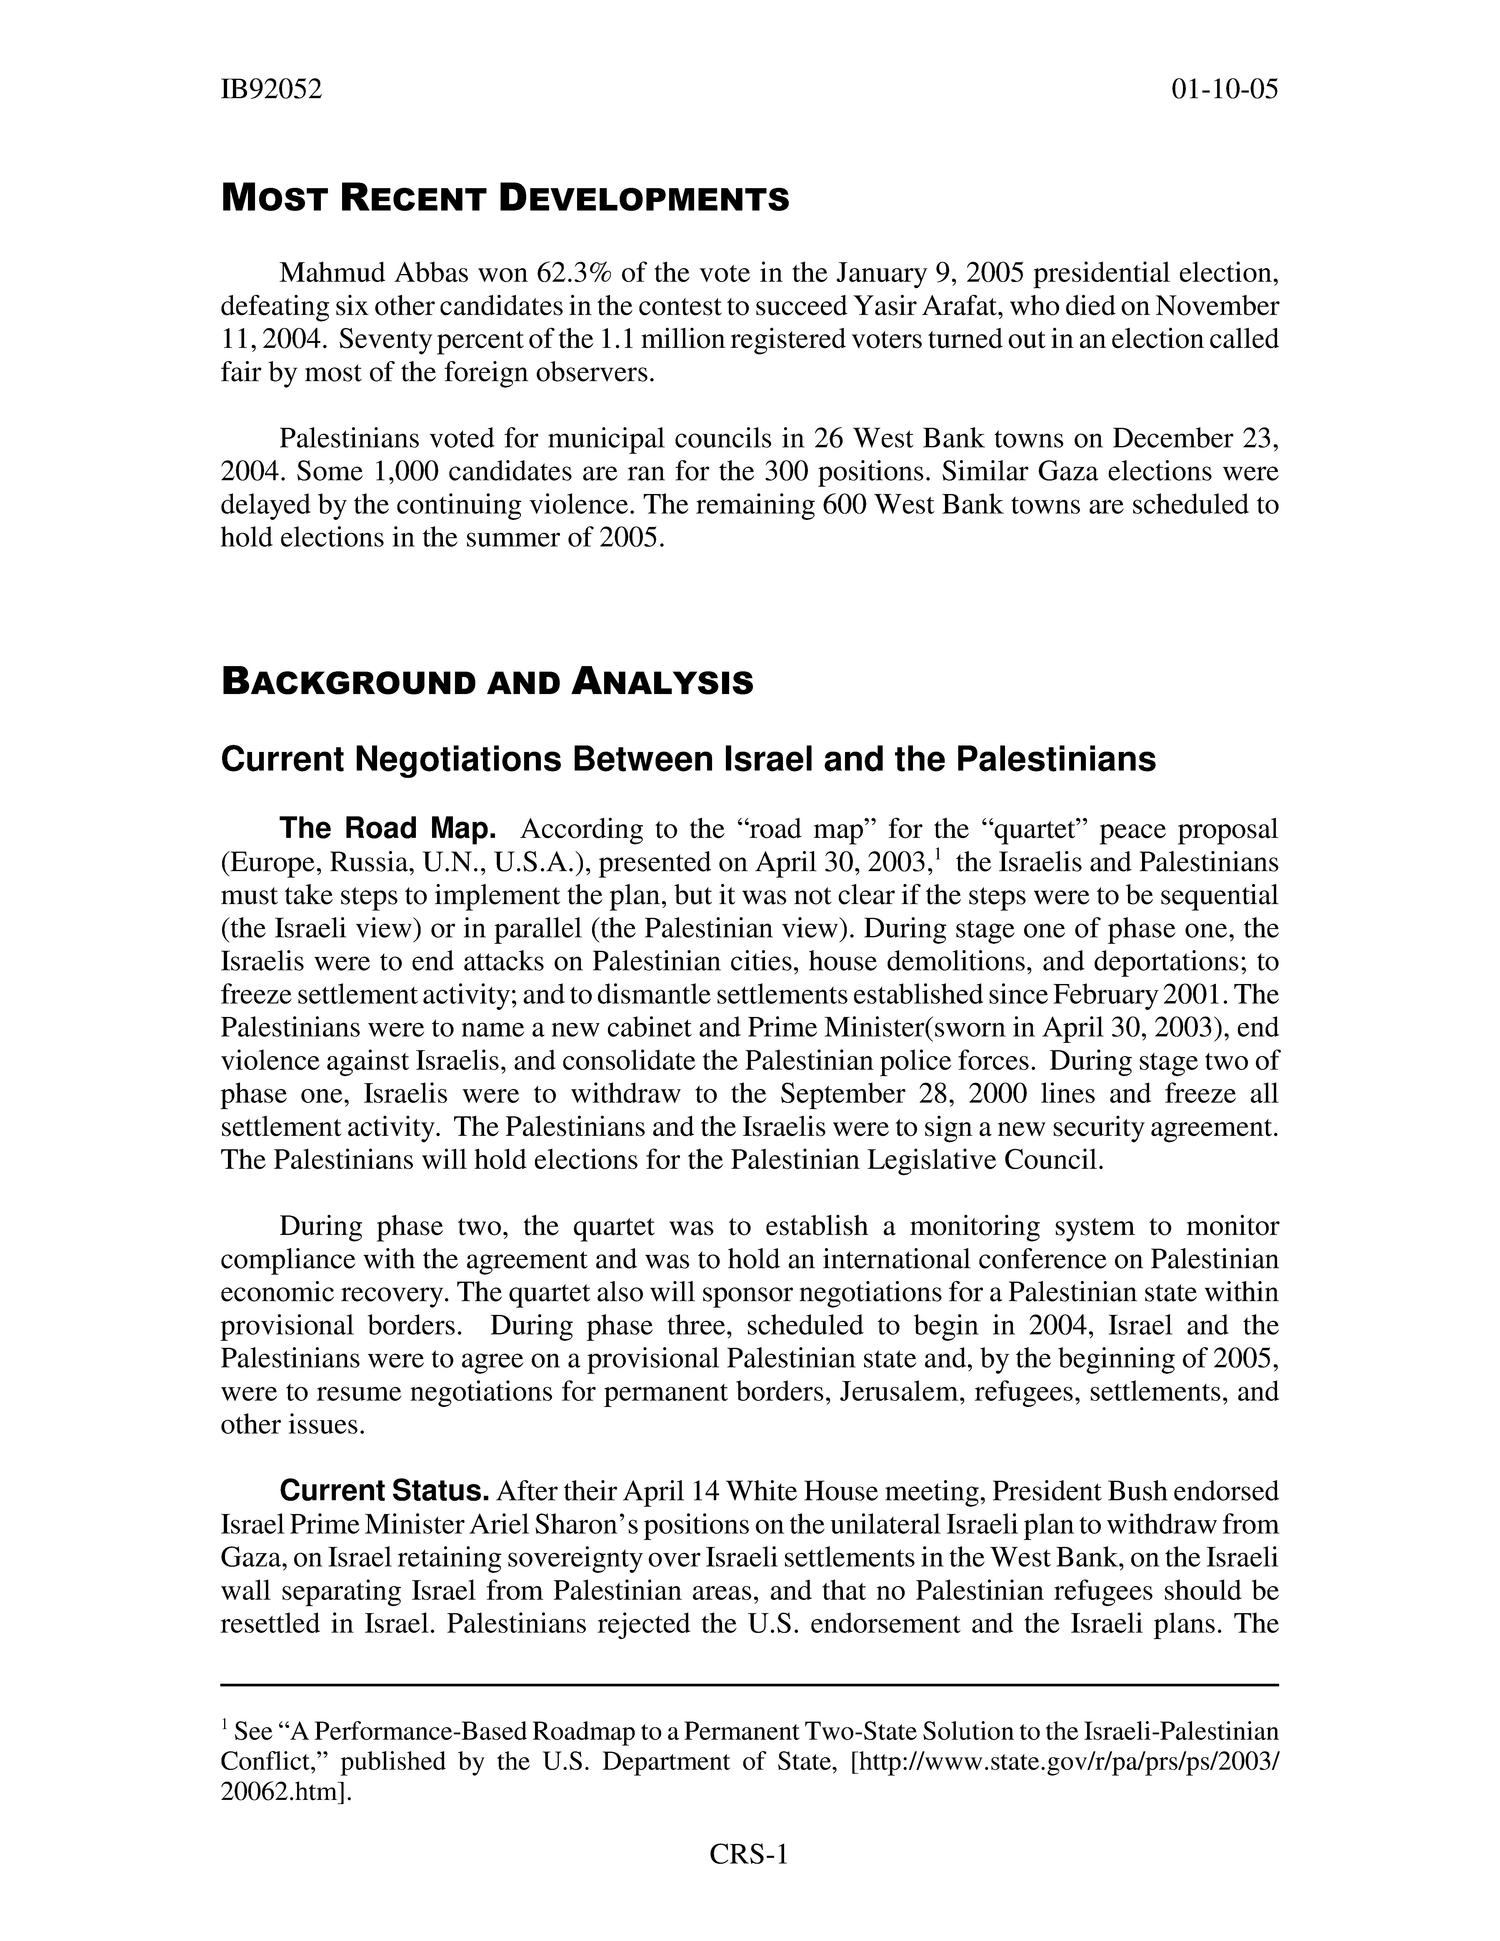 Palestinians and Middle East Peace: Issues for the United States
                                                
                                                    [Sequence #]: 4 of 18
                                                